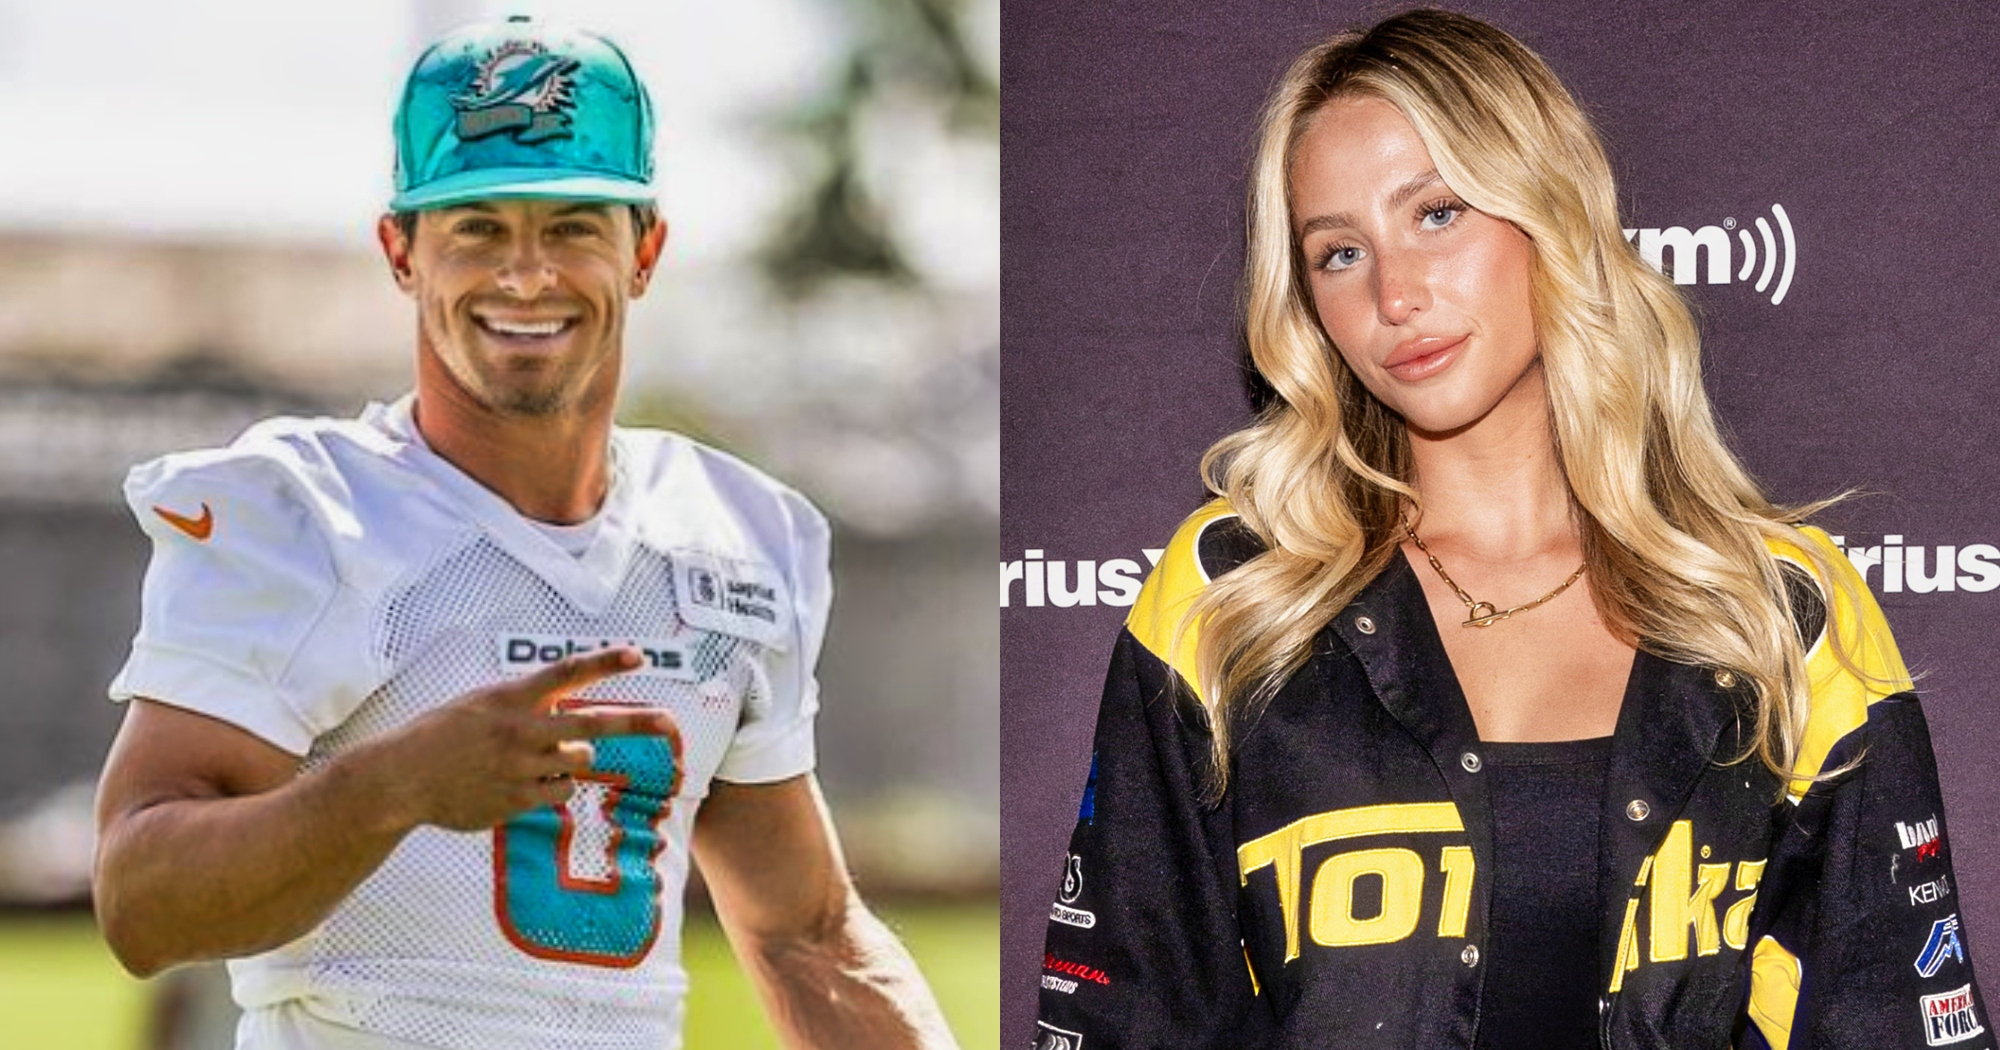 RUMOR: Alix Earle Cheated On Braxton Berrios With Teenager